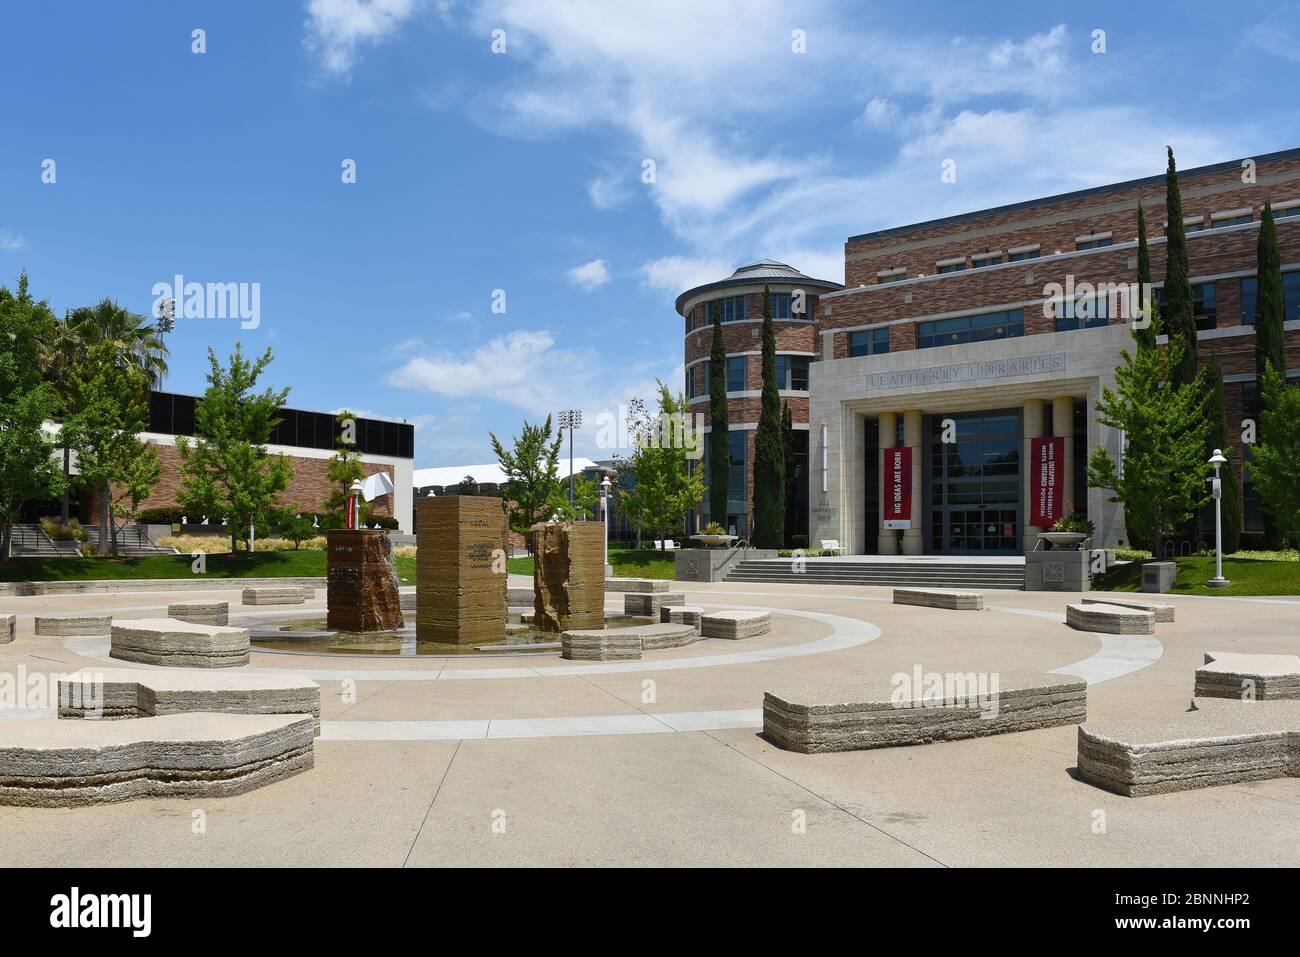 ORANGE, CALIFORNIA - 14 MAY 2020: Attallah Piazza with the Leatherby Libraries in the background. Stock Photo